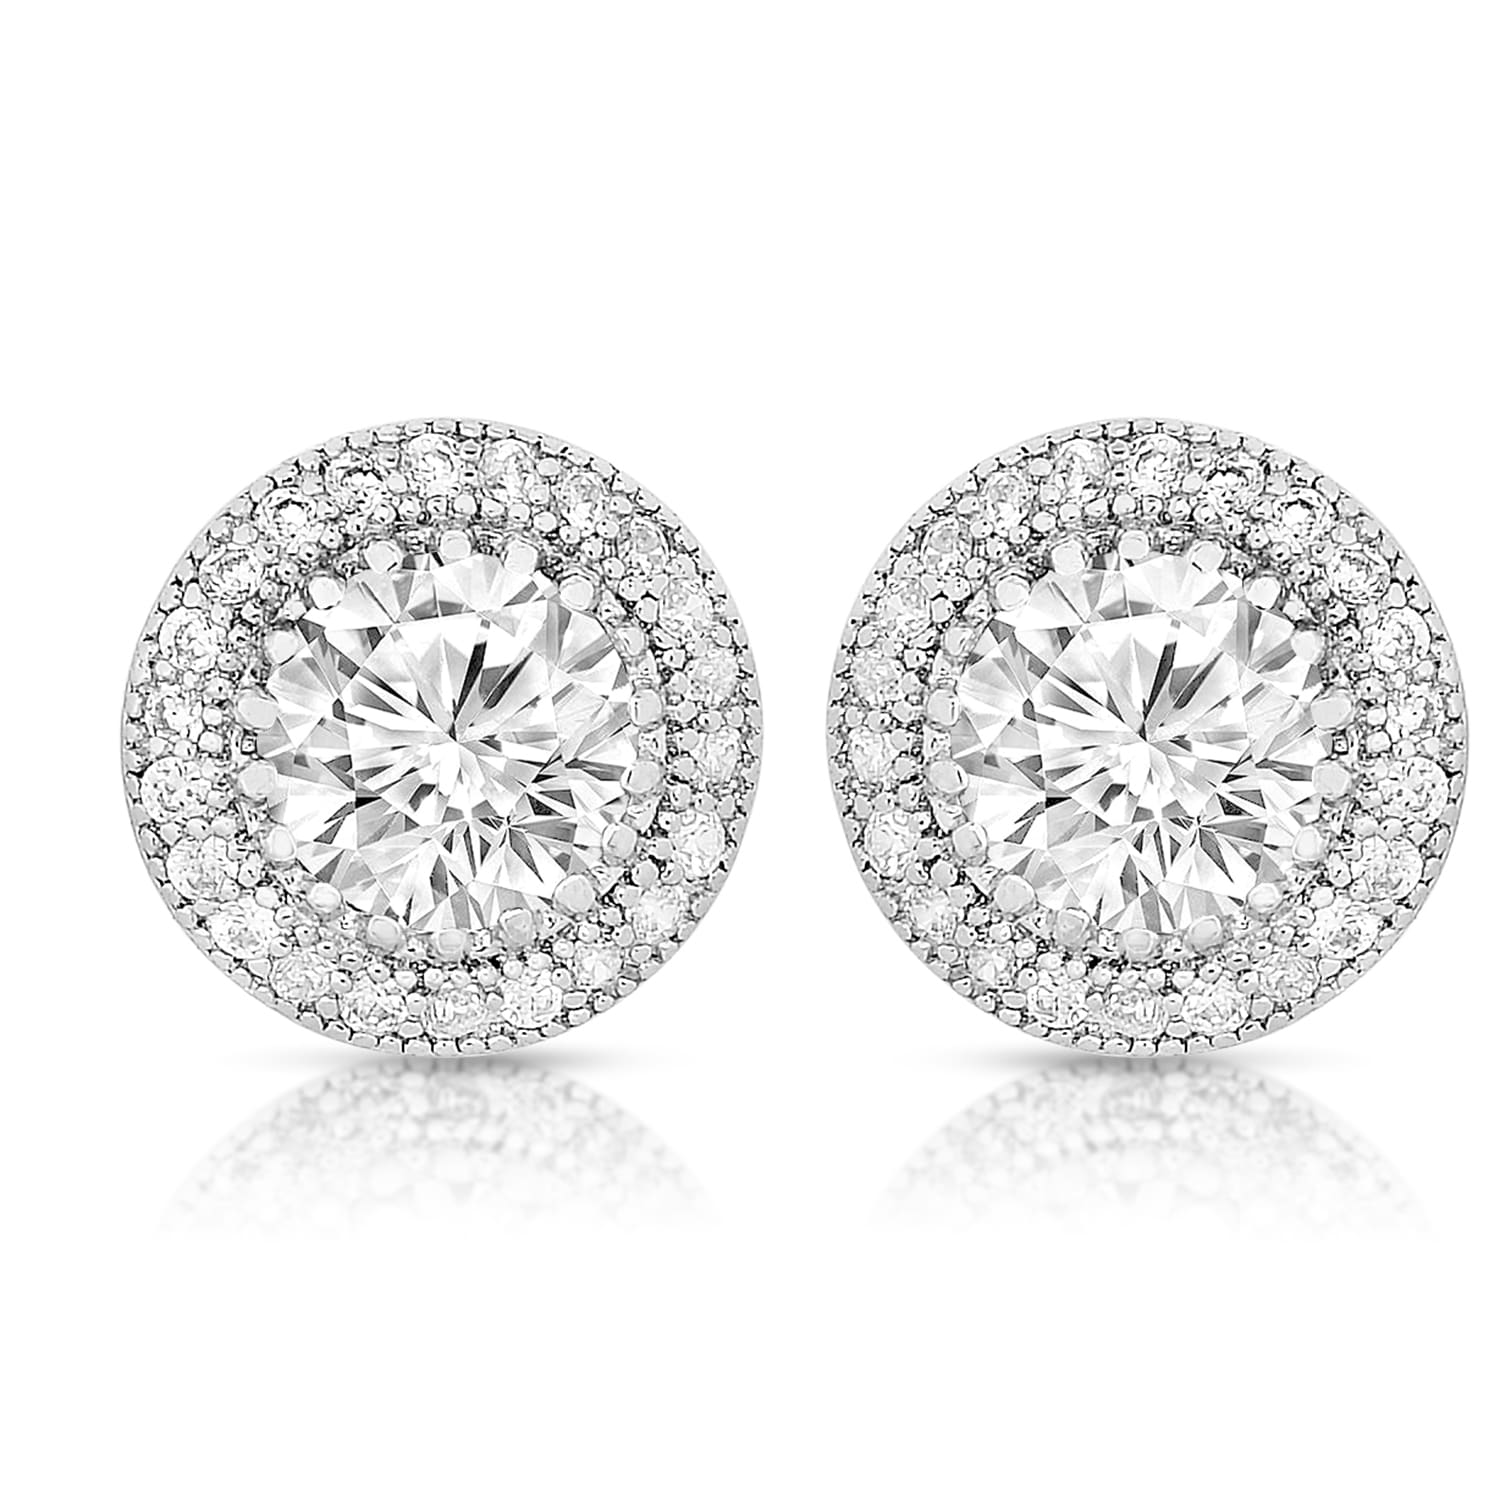 Shop Collette Z Sterling Silver Cubic Zirconia Round Earrings - White ...